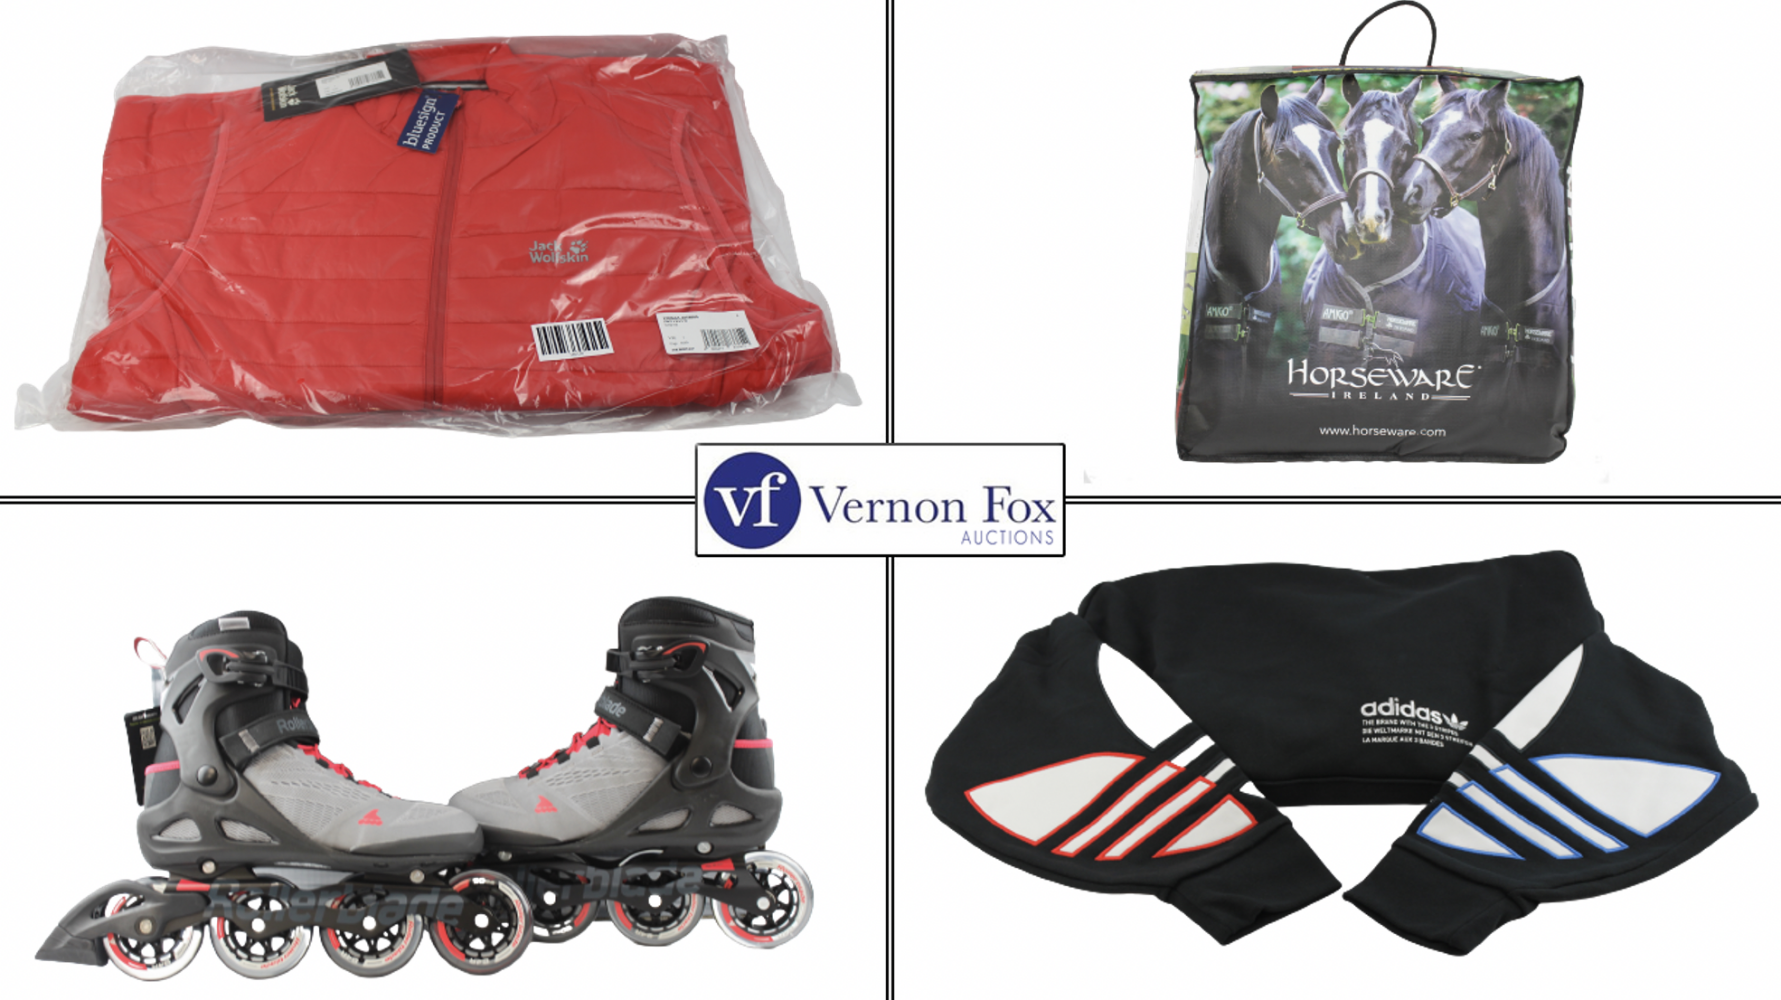 TIMED ONLINE AUCTION: A Wide Choice of Sports Clothing and Equipment. FREE UK DELIVERY!